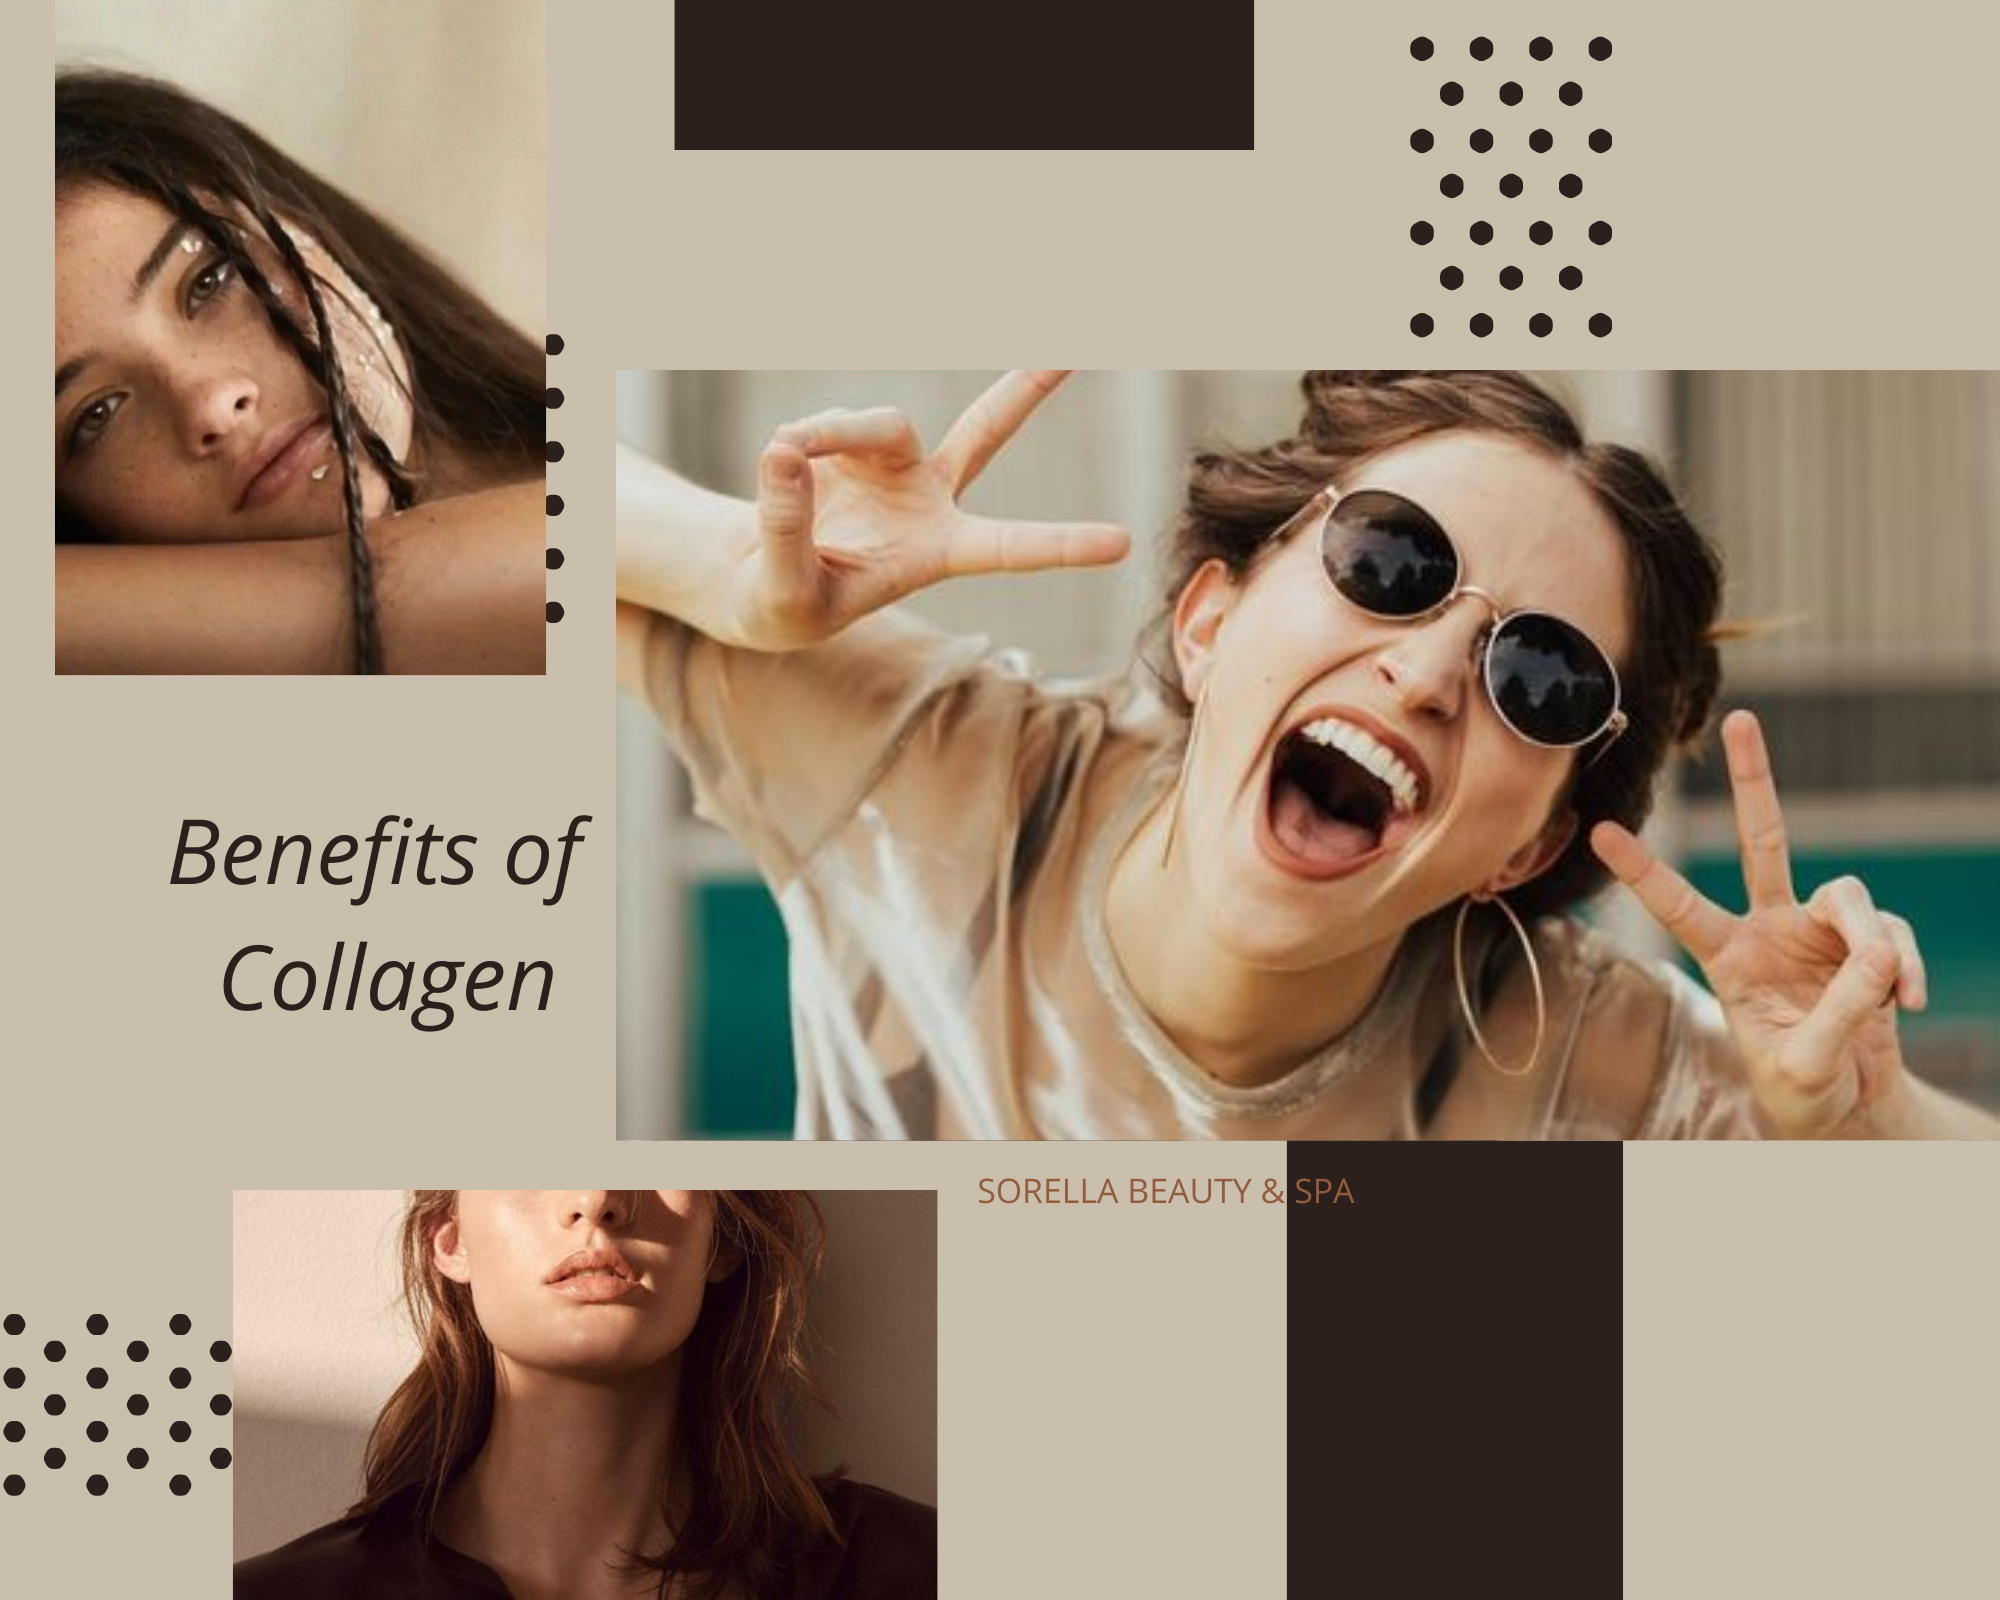 Collagen supplements have several advantages for skin, joint, bone, muscular, and cardiac health